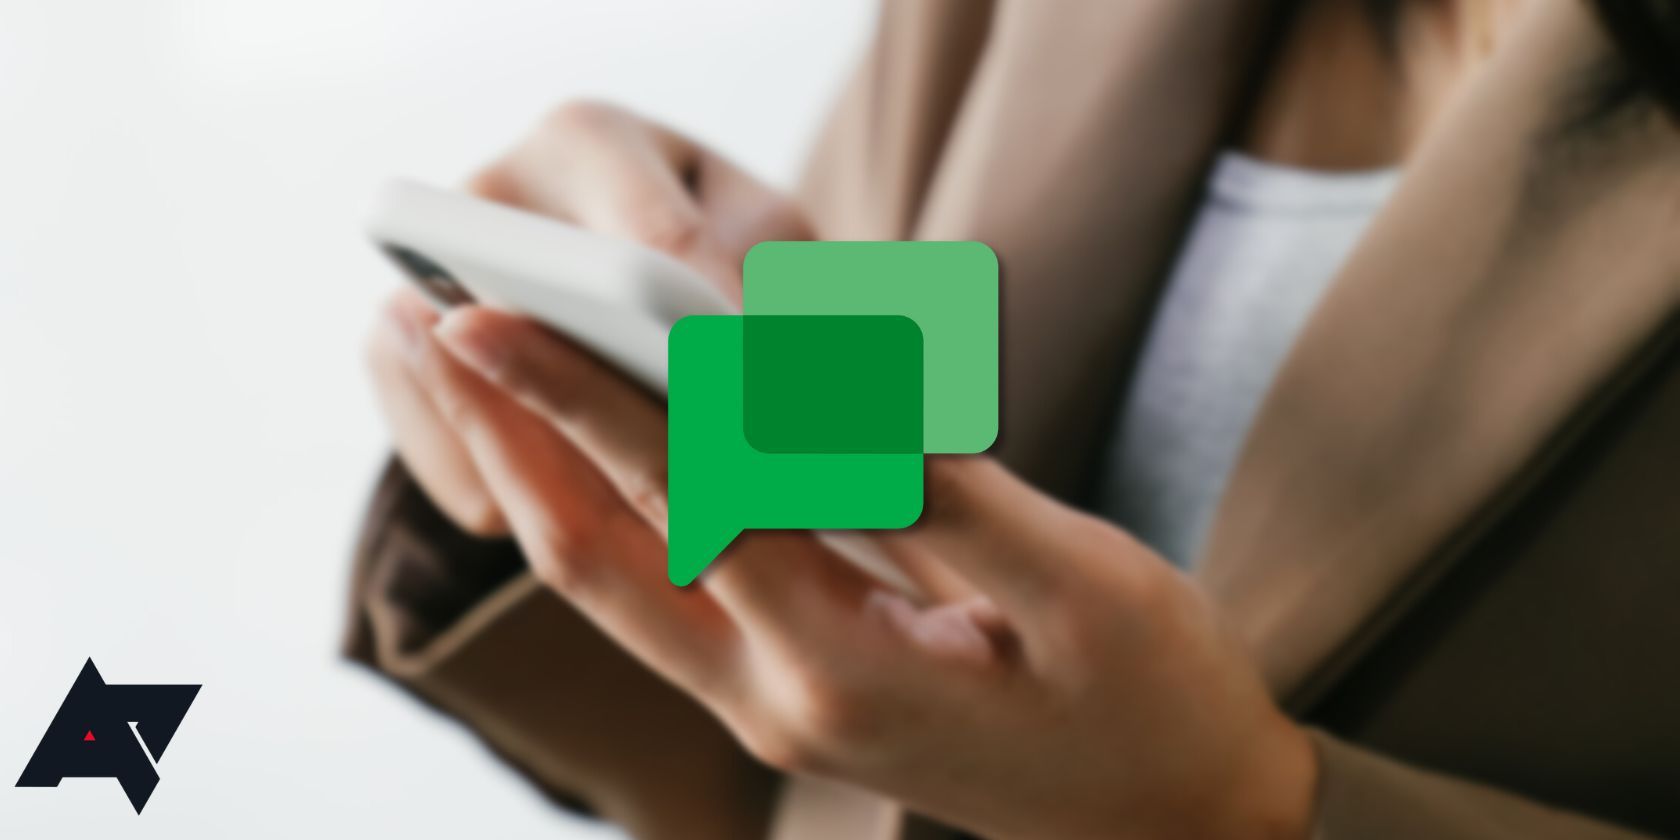 google chat logo superimposed on a pair of hands